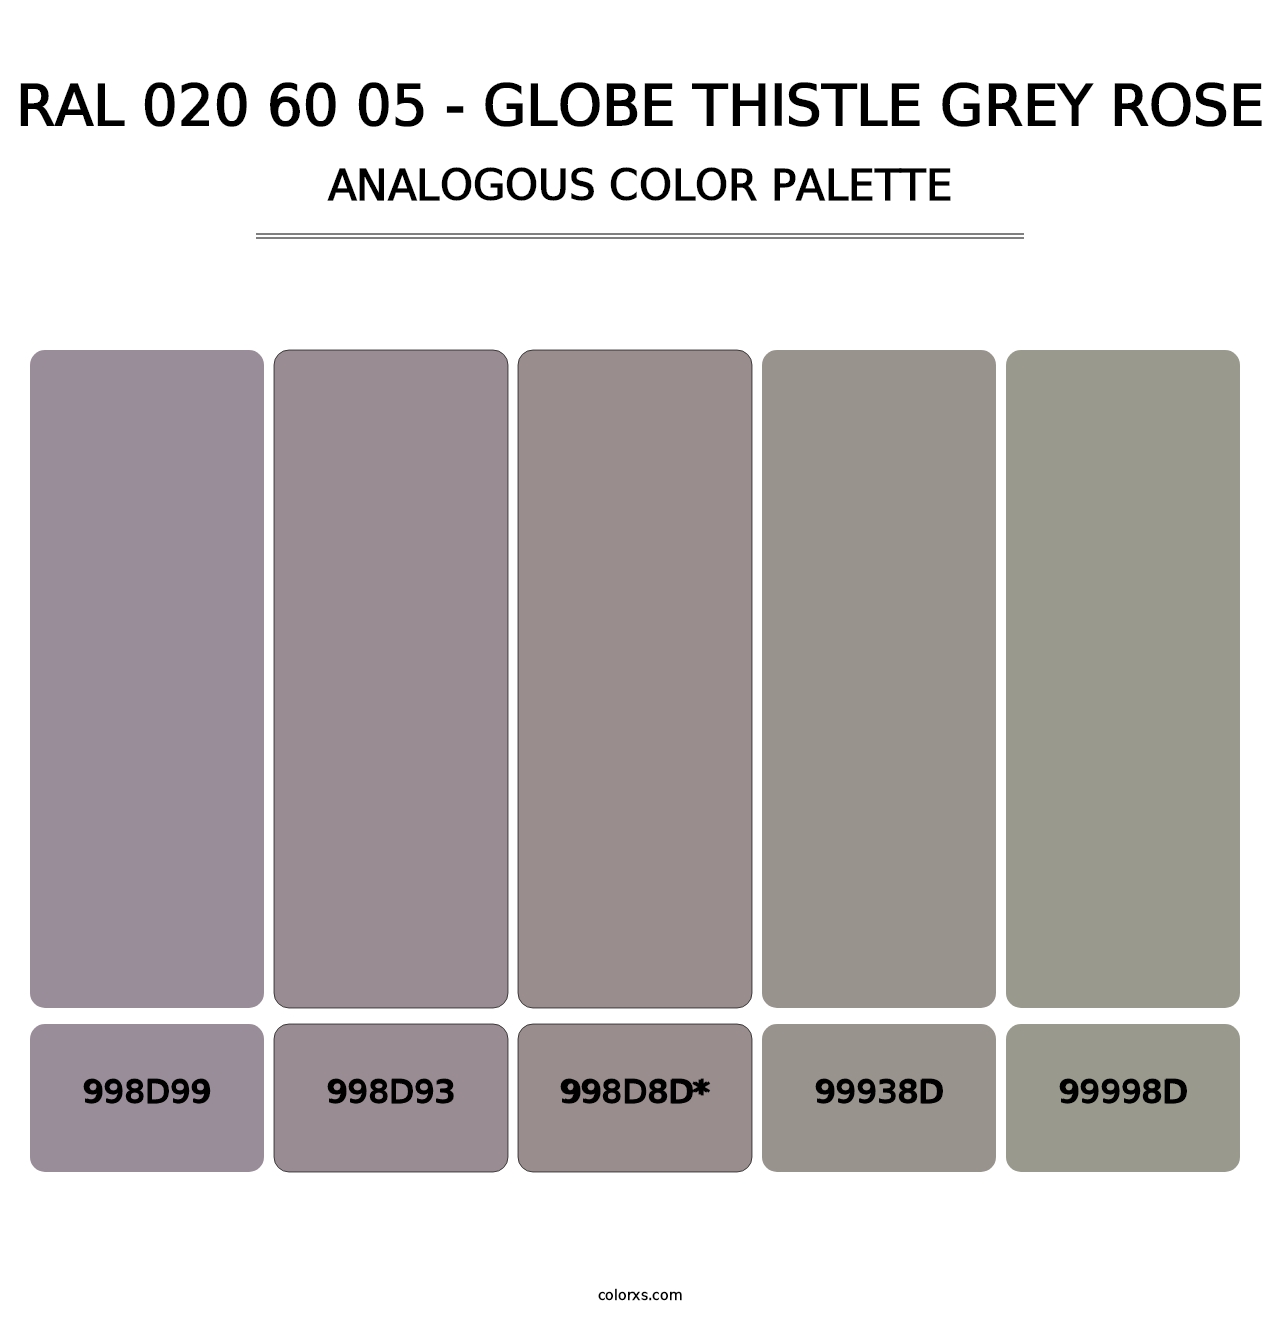 RAL 020 60 05 - Globe Thistle Grey Rose - Analogous Color Palette